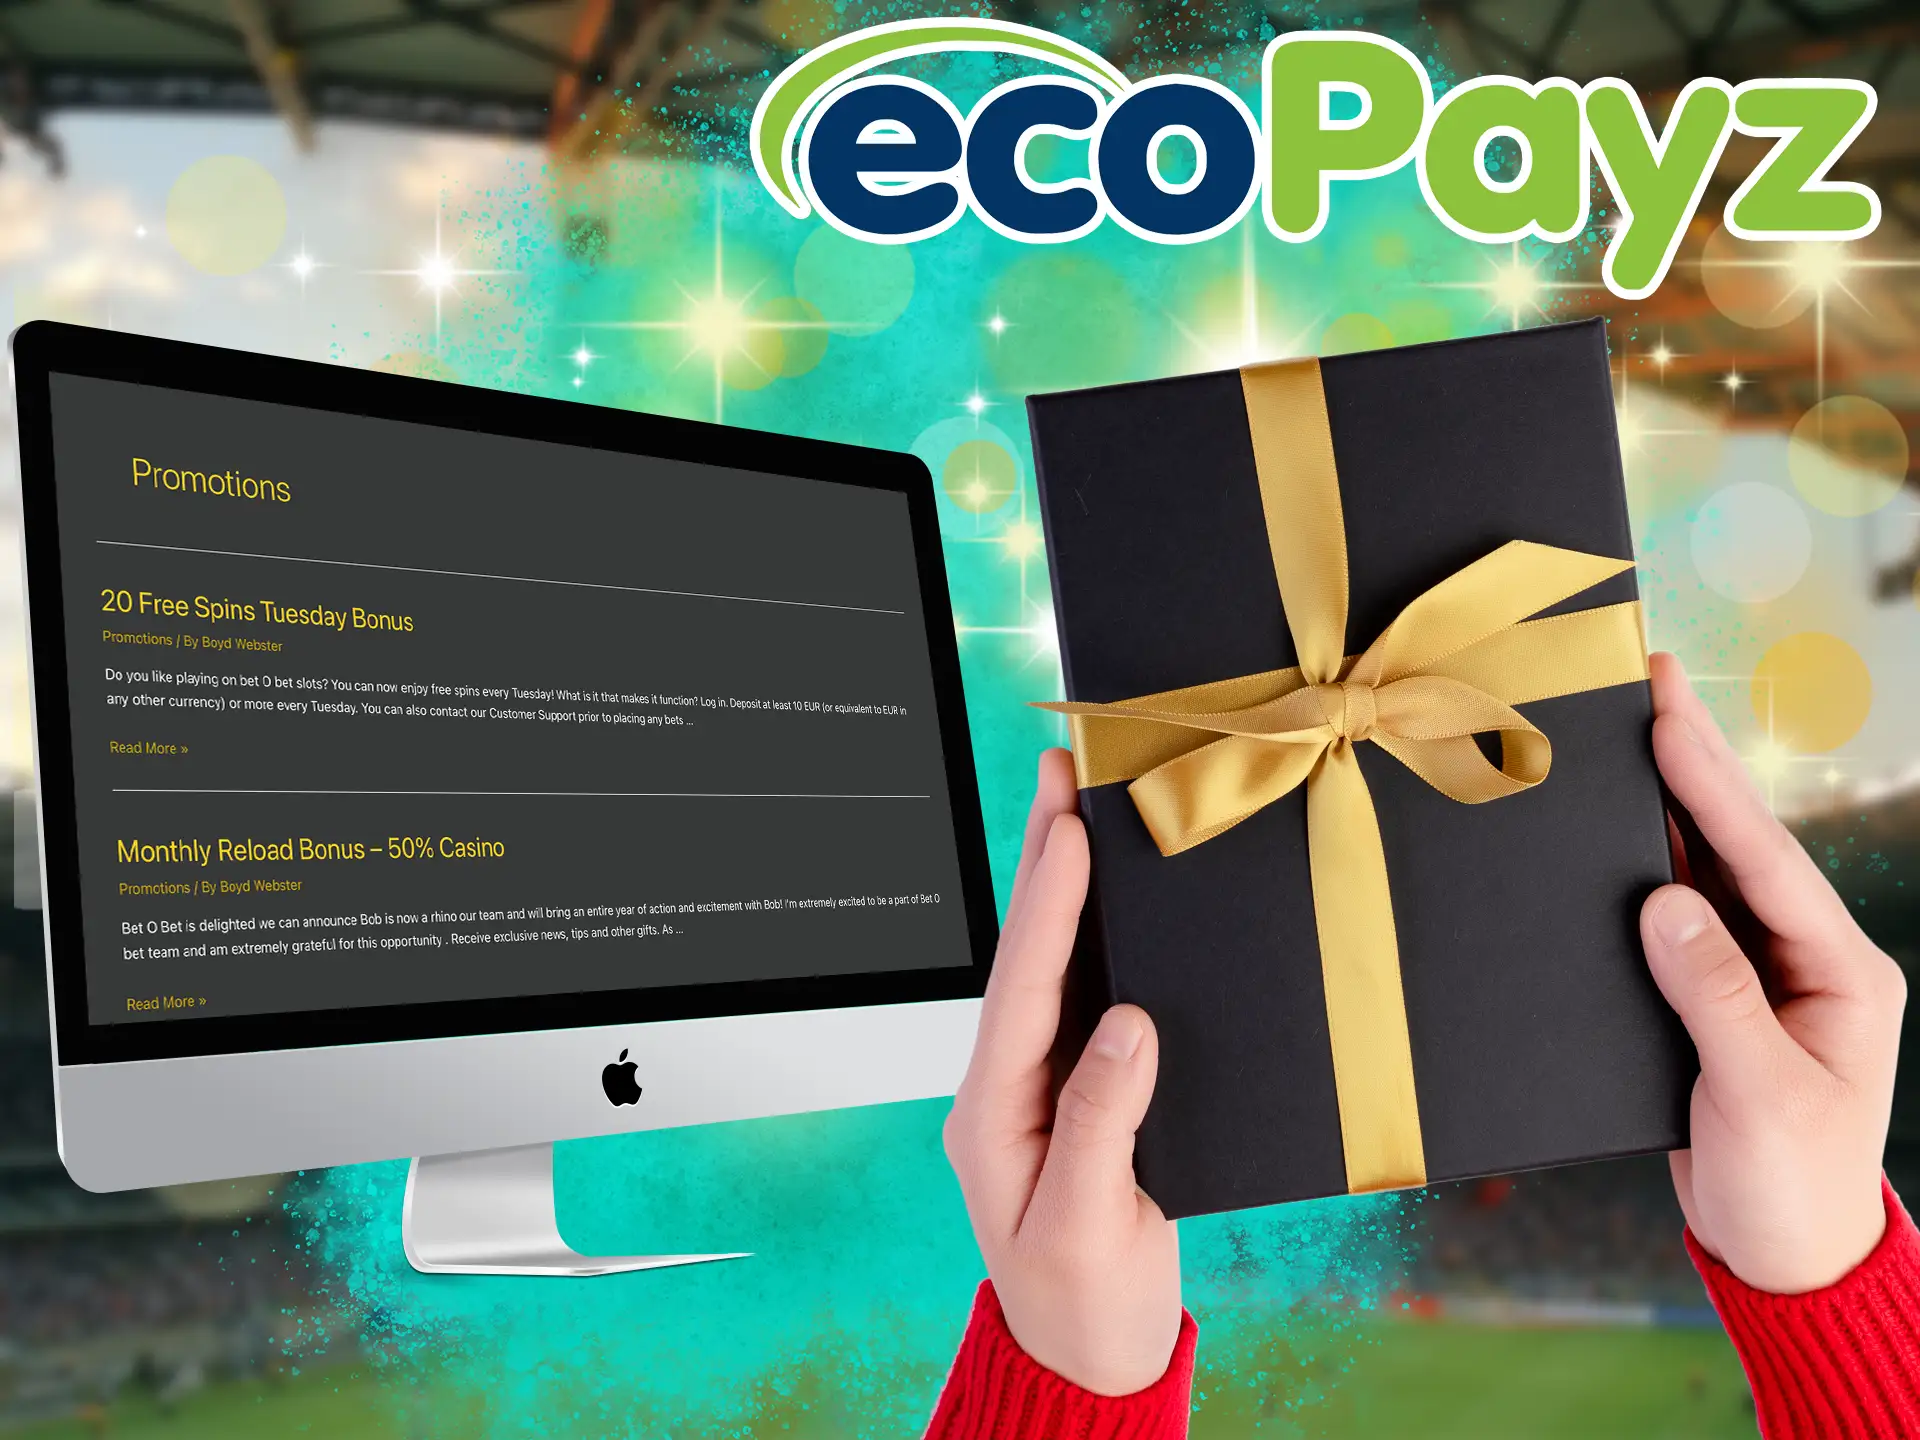 Get special offers when you recharge with EcoPayz payment method, which will give you a new and pleasant interaction experience.